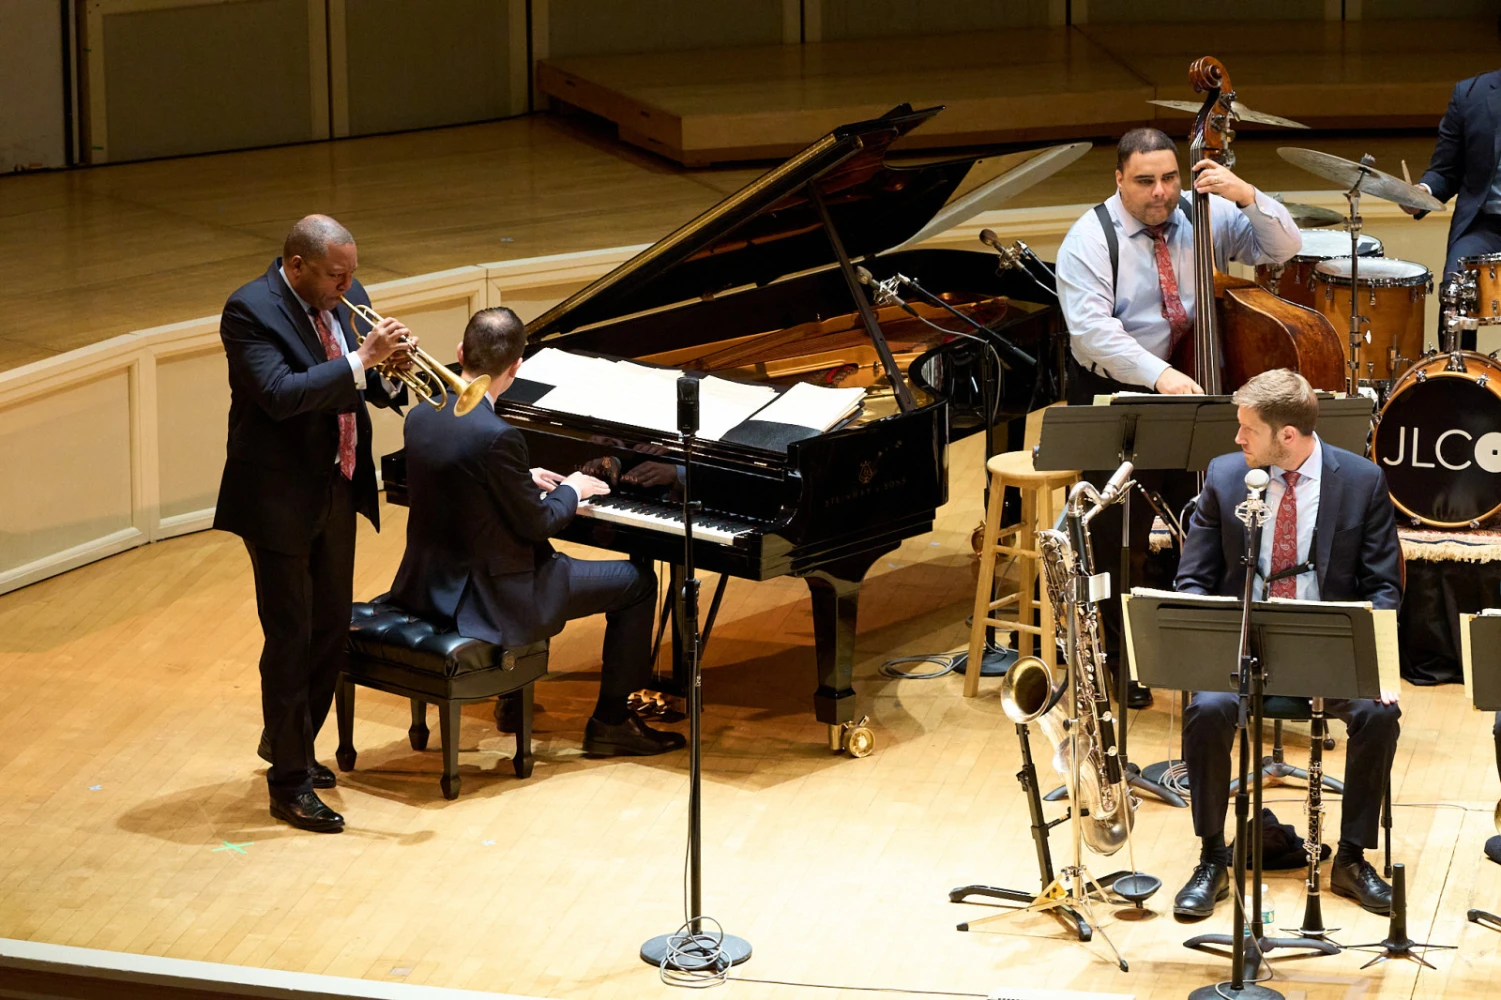 Celebrity Series presents Jazz at Lincoln Center Orchestra with Wynton Marsalis: What to expect - 1